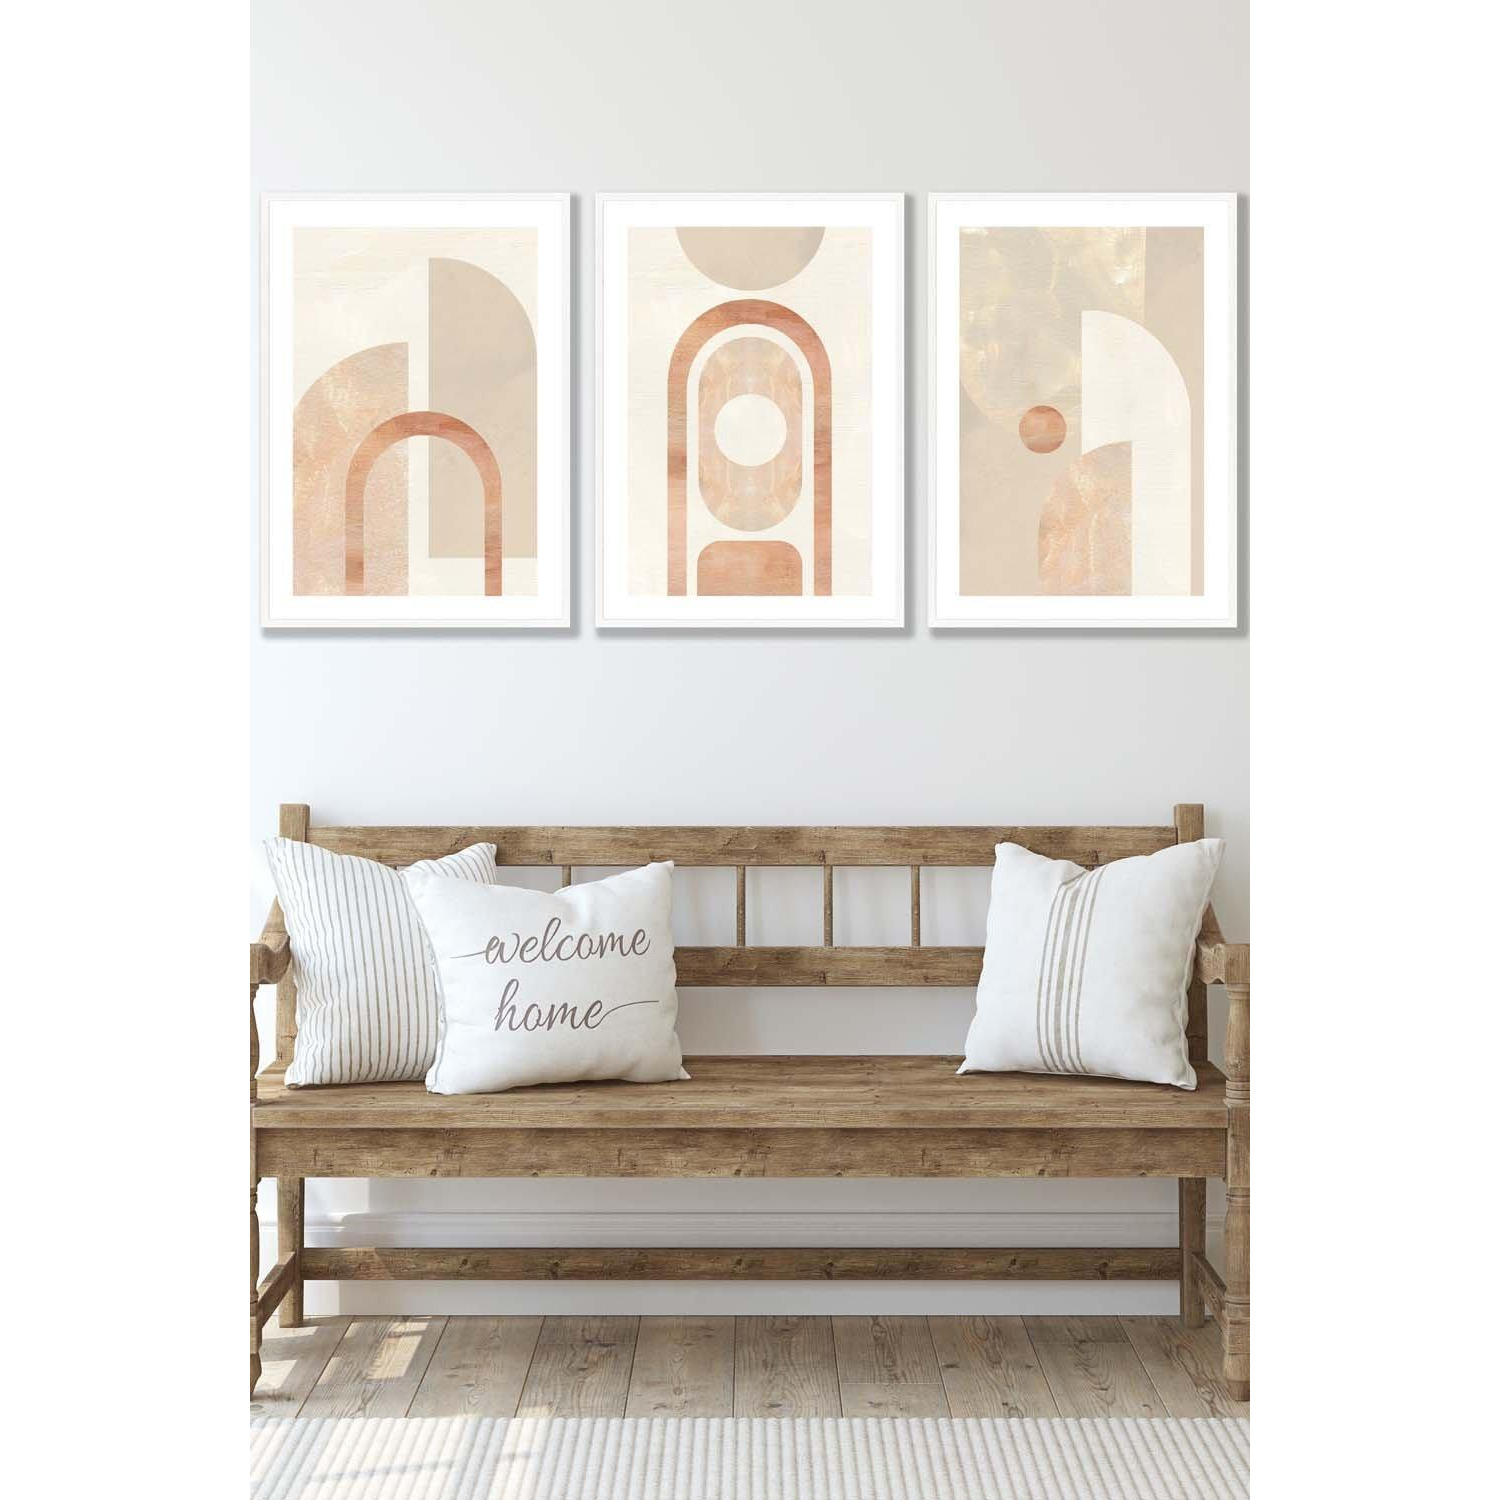 Set of 3 White Framed Mid Century Beige and Terracotta Arches Wall Art - image 1